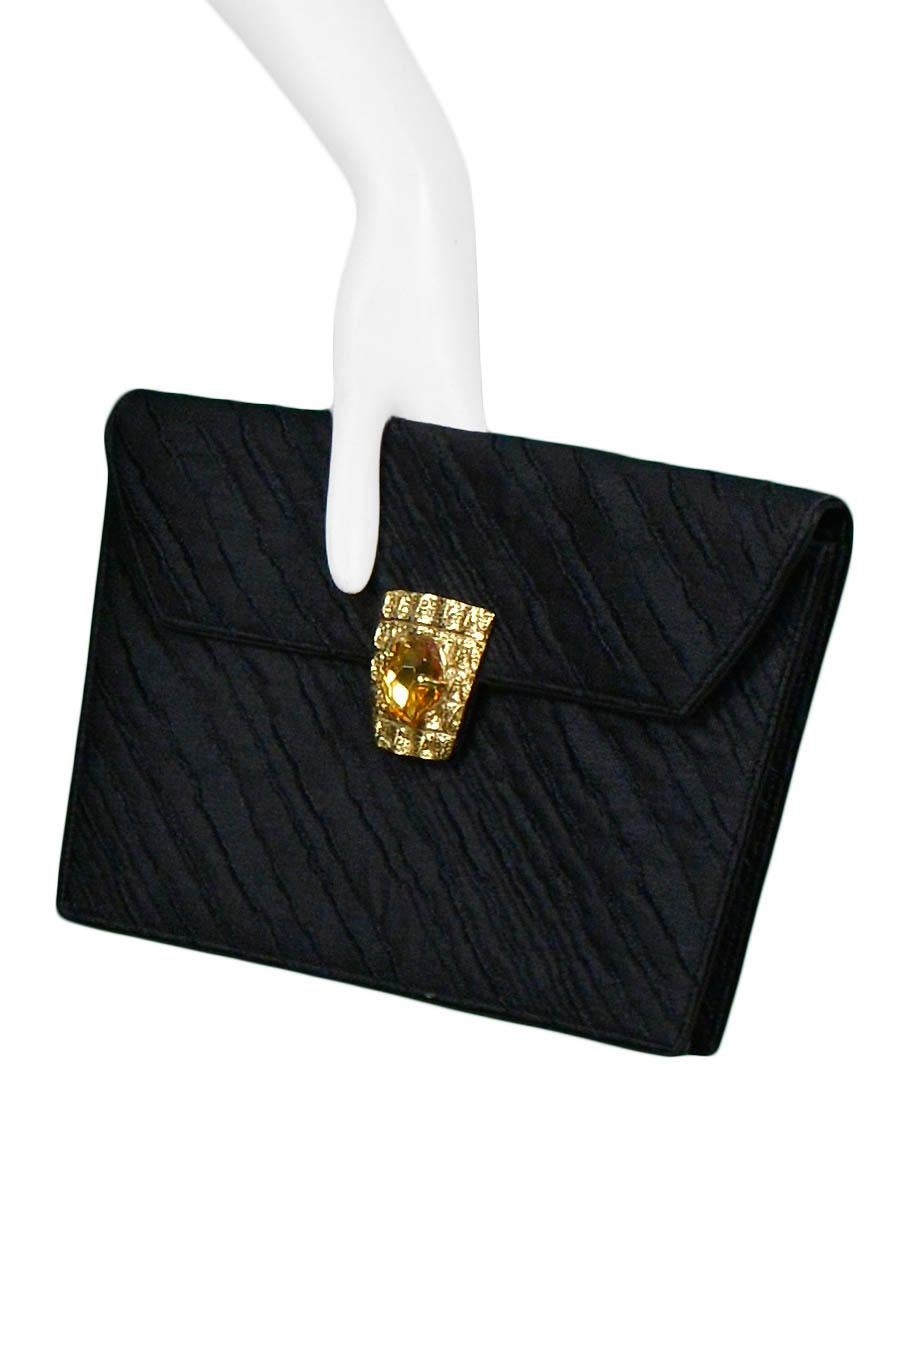 Yves Saint Laurent YSL Black Pencil Skirt & Gem Clutch Set 1980s In Excellent Condition For Sale In Los Angeles, CA